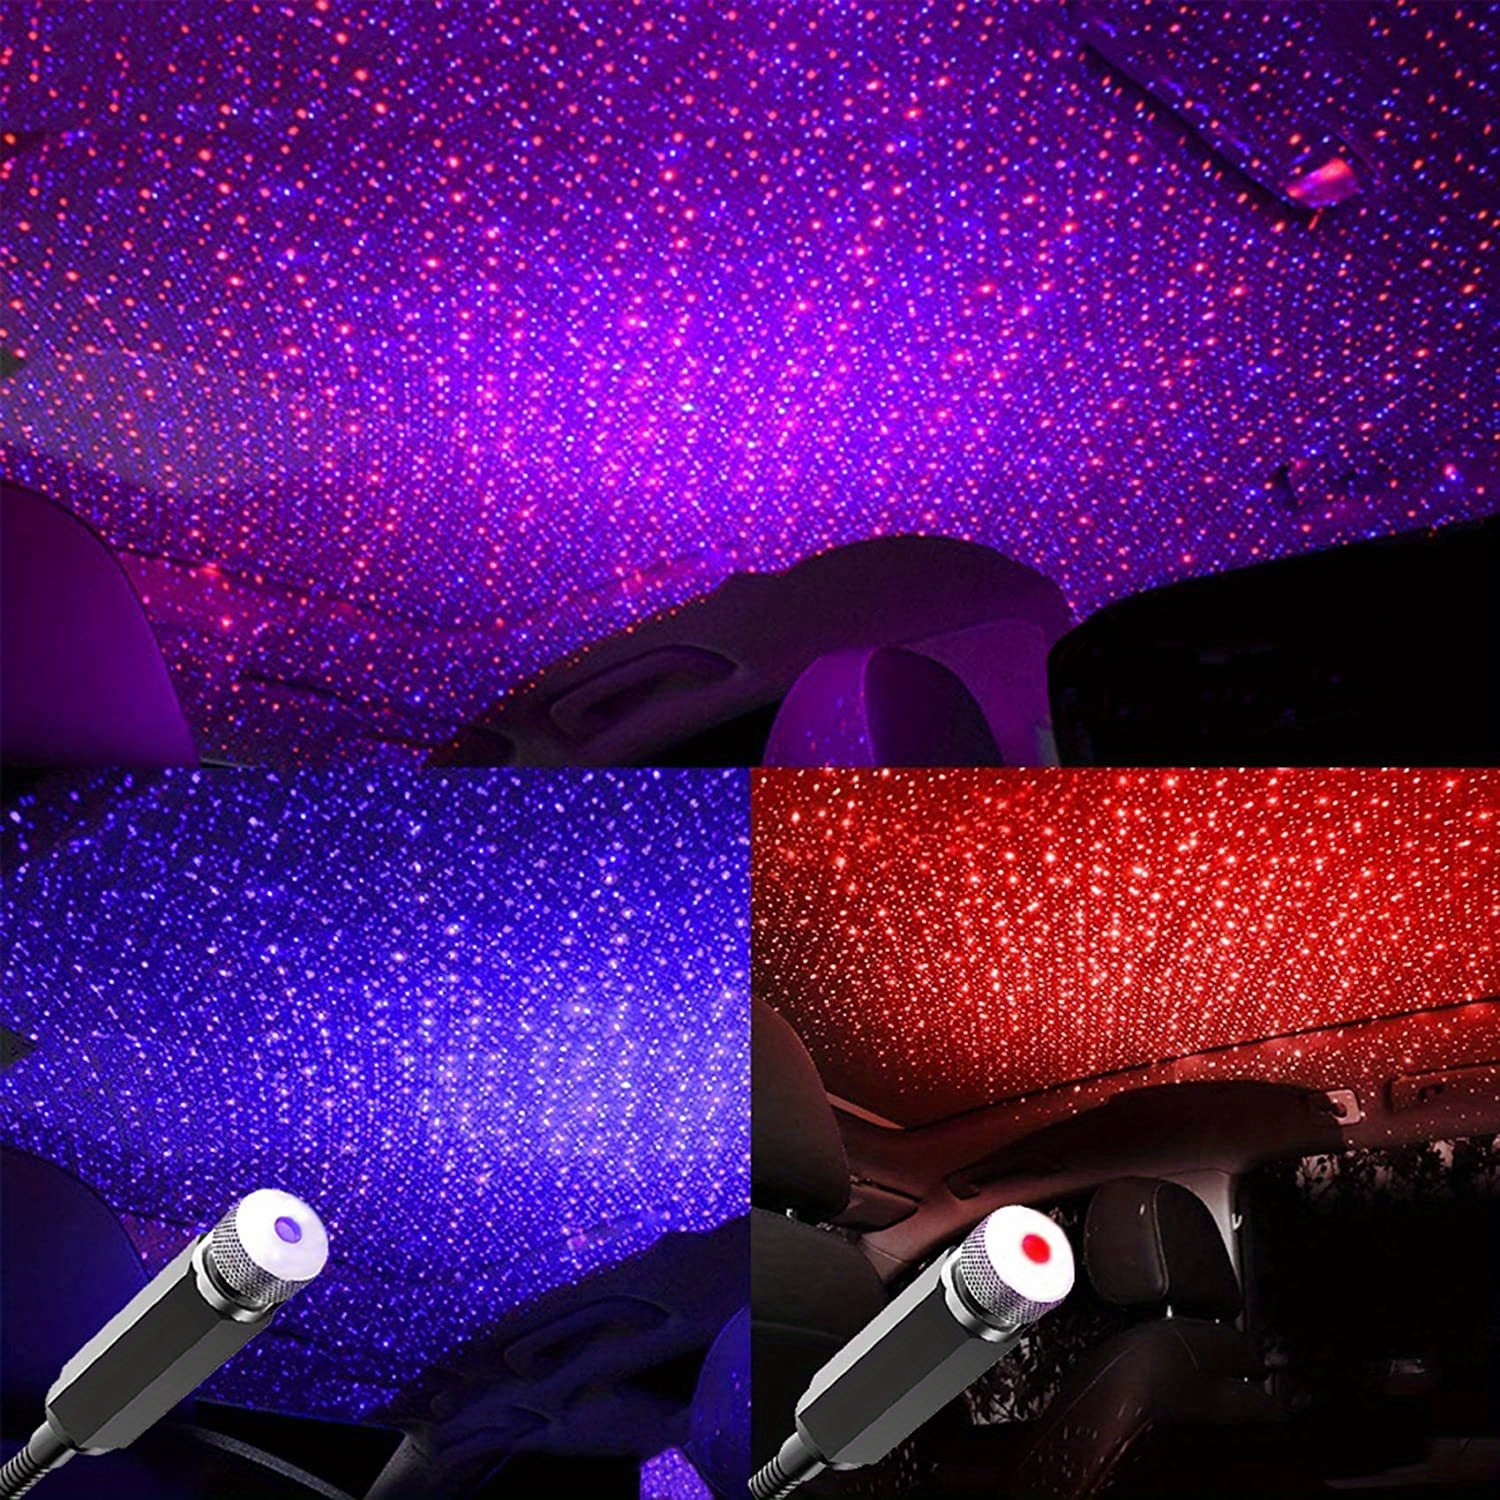 Auto Roof Star Lights USB Car Interior Decoration Light Led Starry Sky  Light Sound Control Star Projector Lights Romantic Car Atmosphere Lamp From  9,37 €